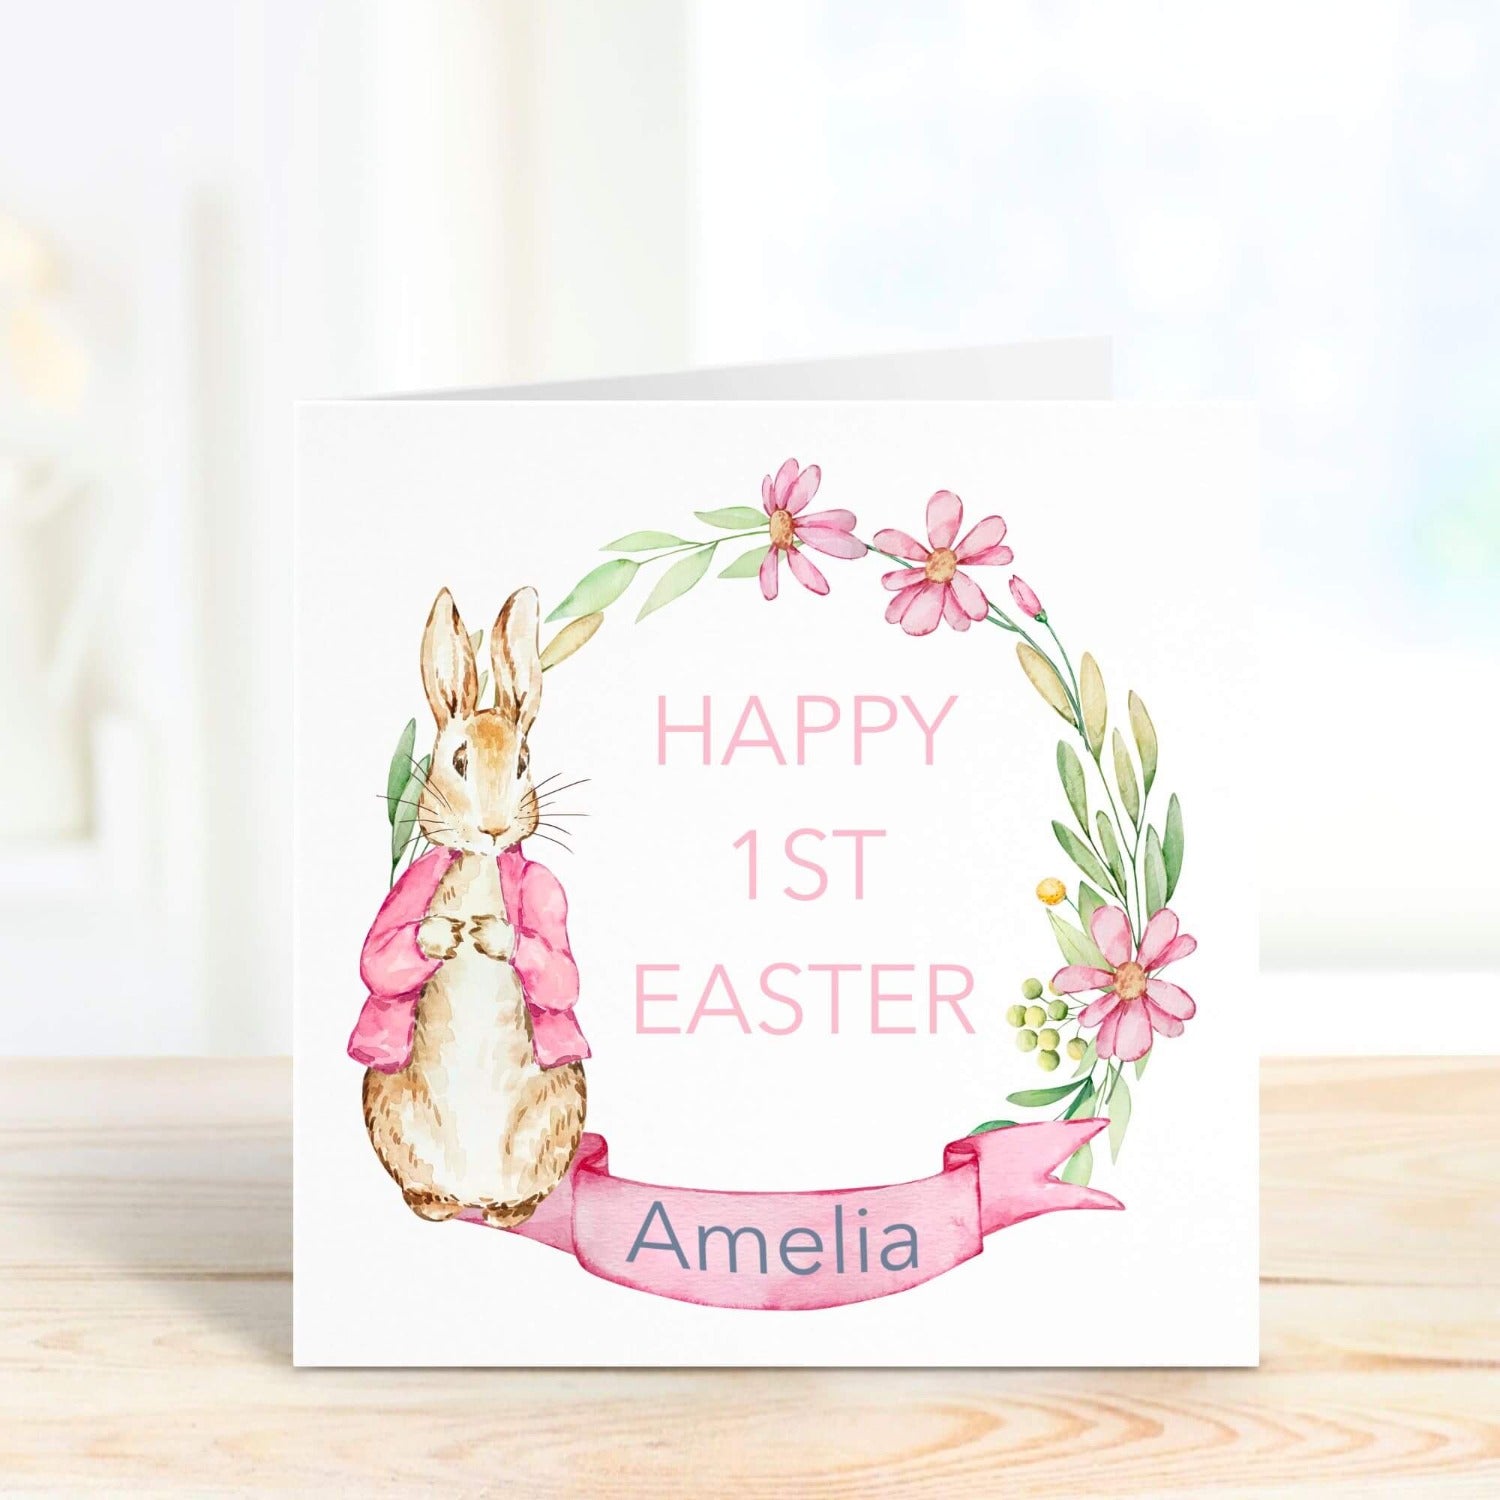 personalised name and message easter card with peter rabbit wreath design